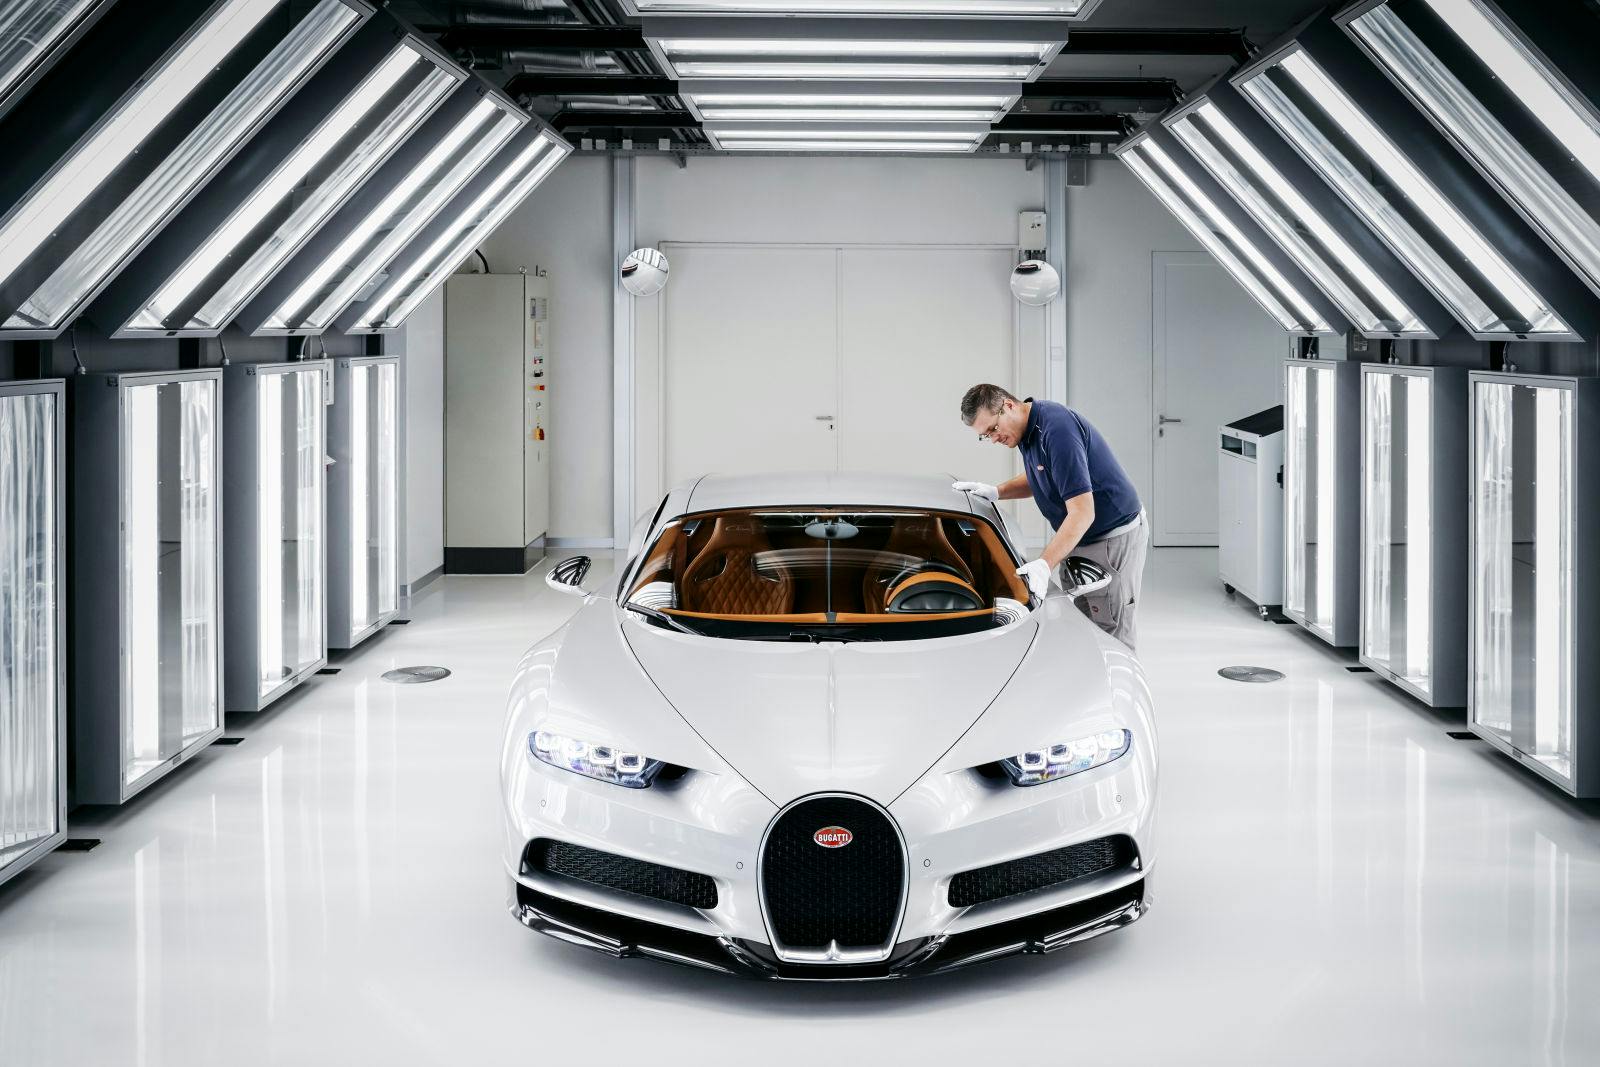 The final paintwork is scrutinized under the bright white lights of Bugatti’s light tunnel for hours in order to identify any near-microscopic blemishes.